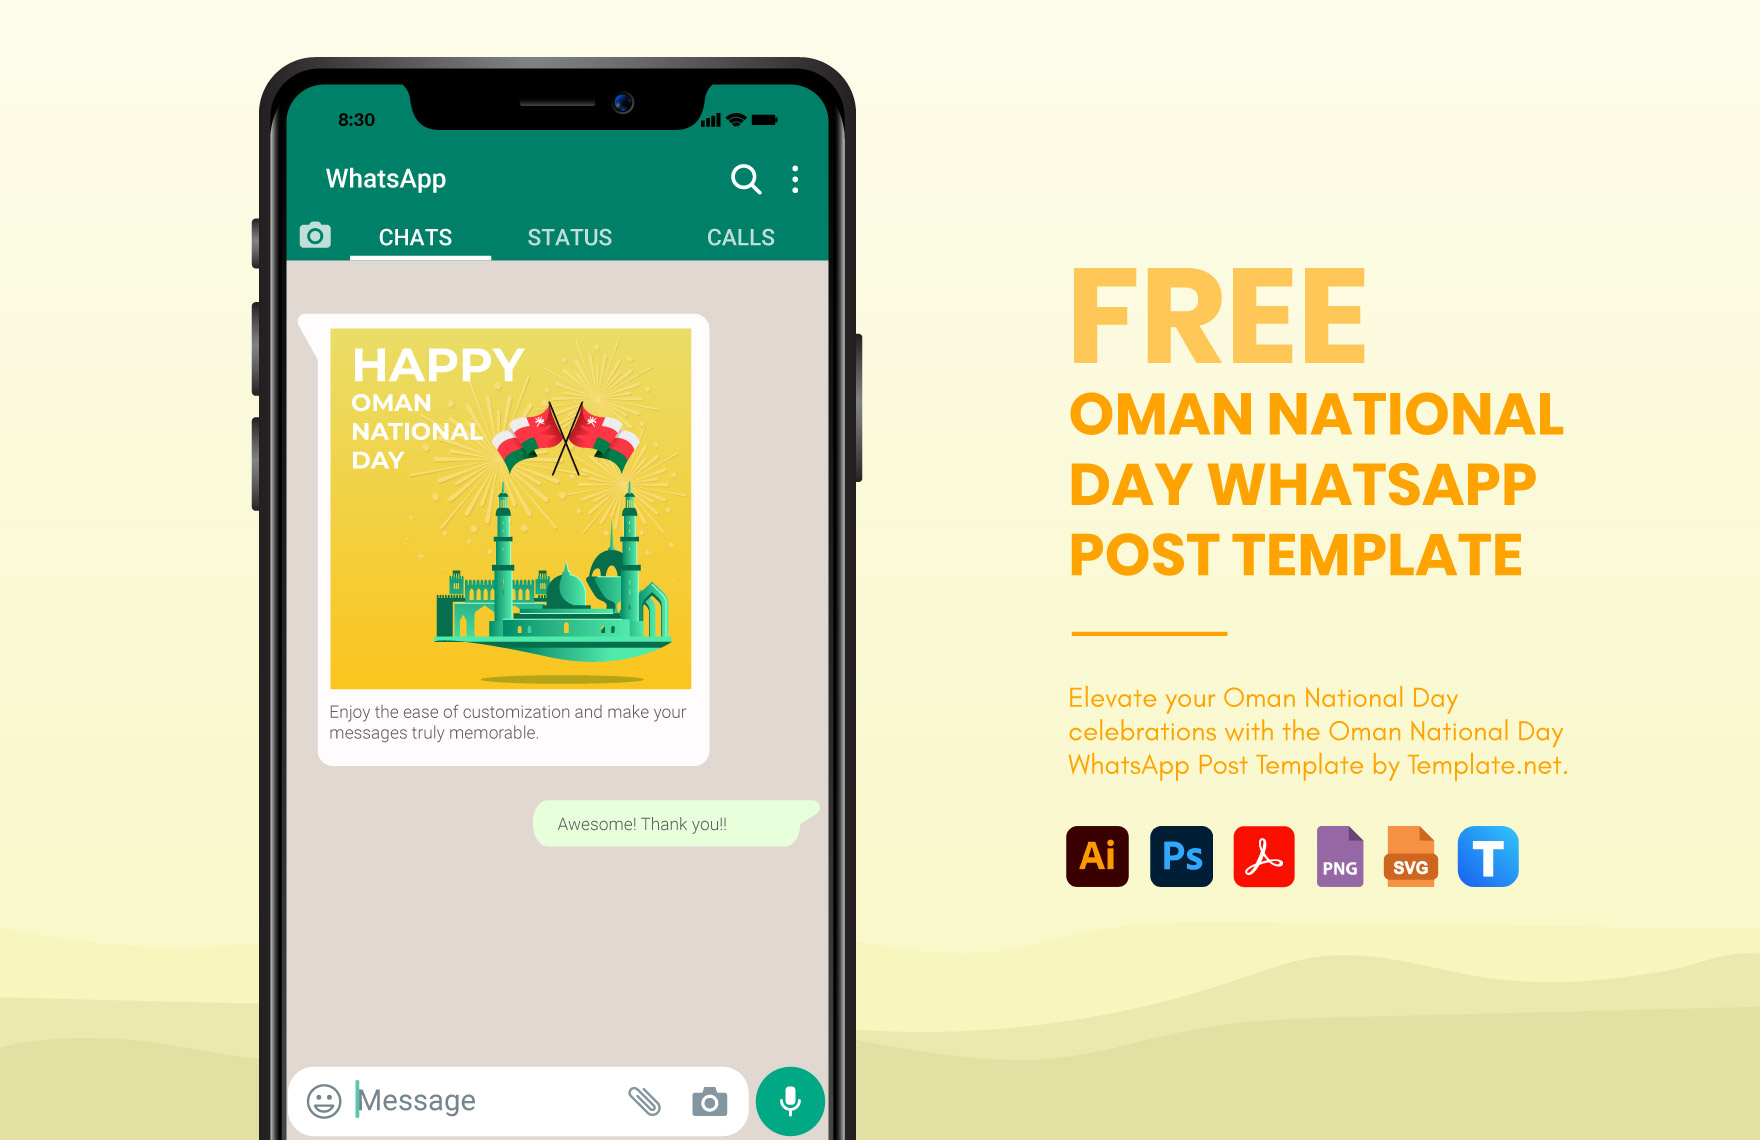 Free Oman National Day WhatsApp Post Template in PDF, Illustrator, PSD, SVG, PNG